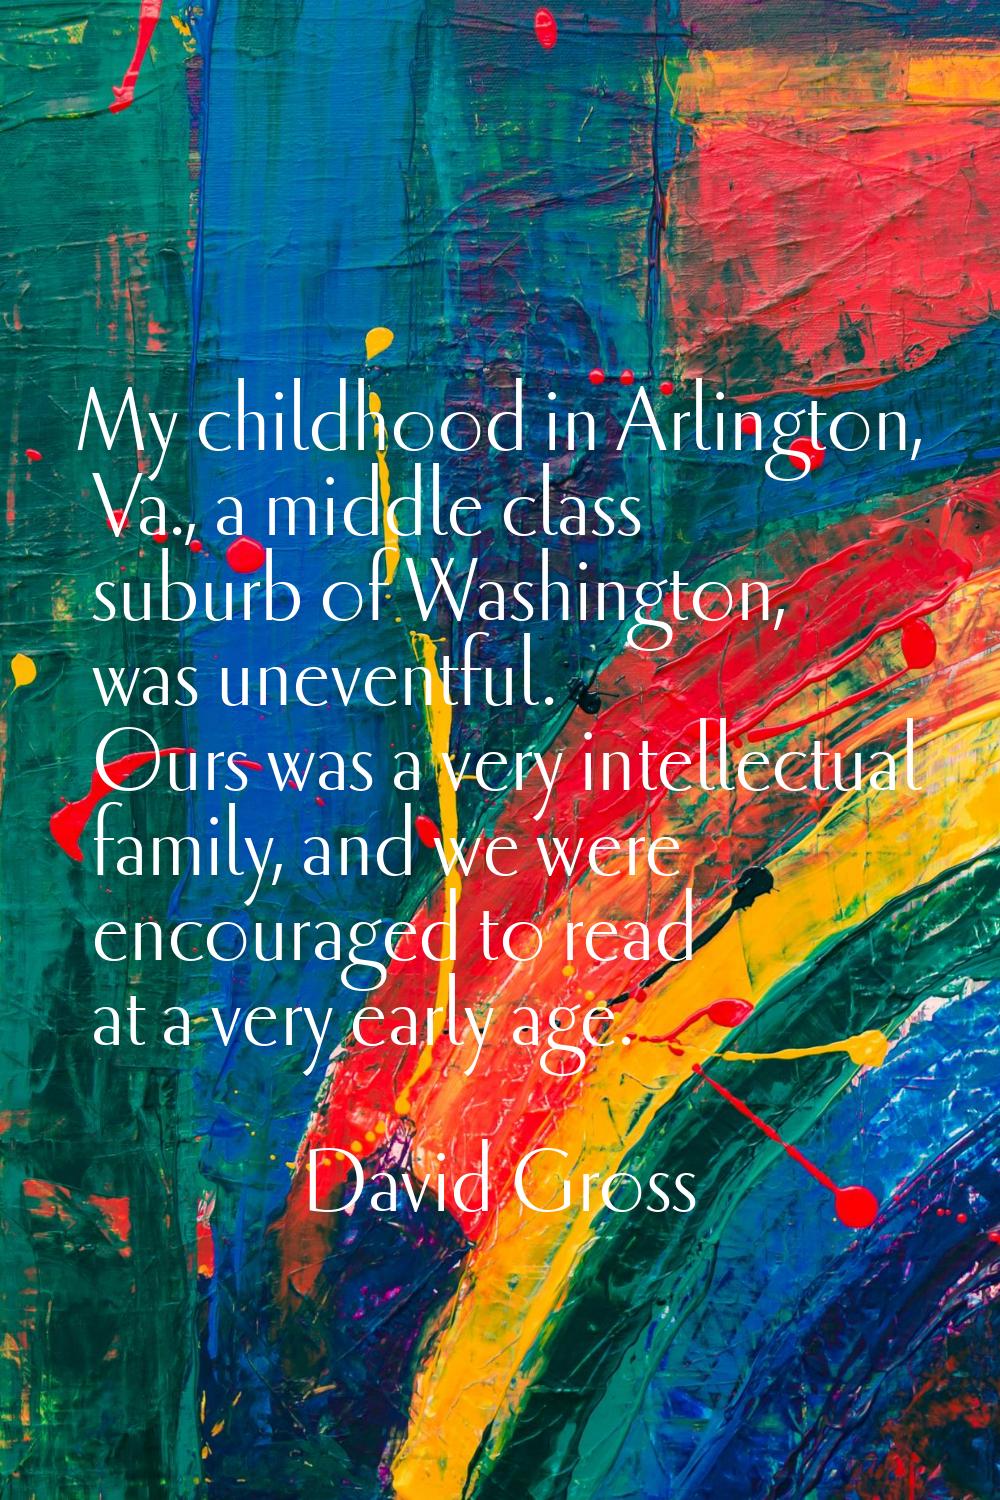 My childhood in Arlington, Va., a middle class suburb of Washington, was uneventful. Ours was a ver